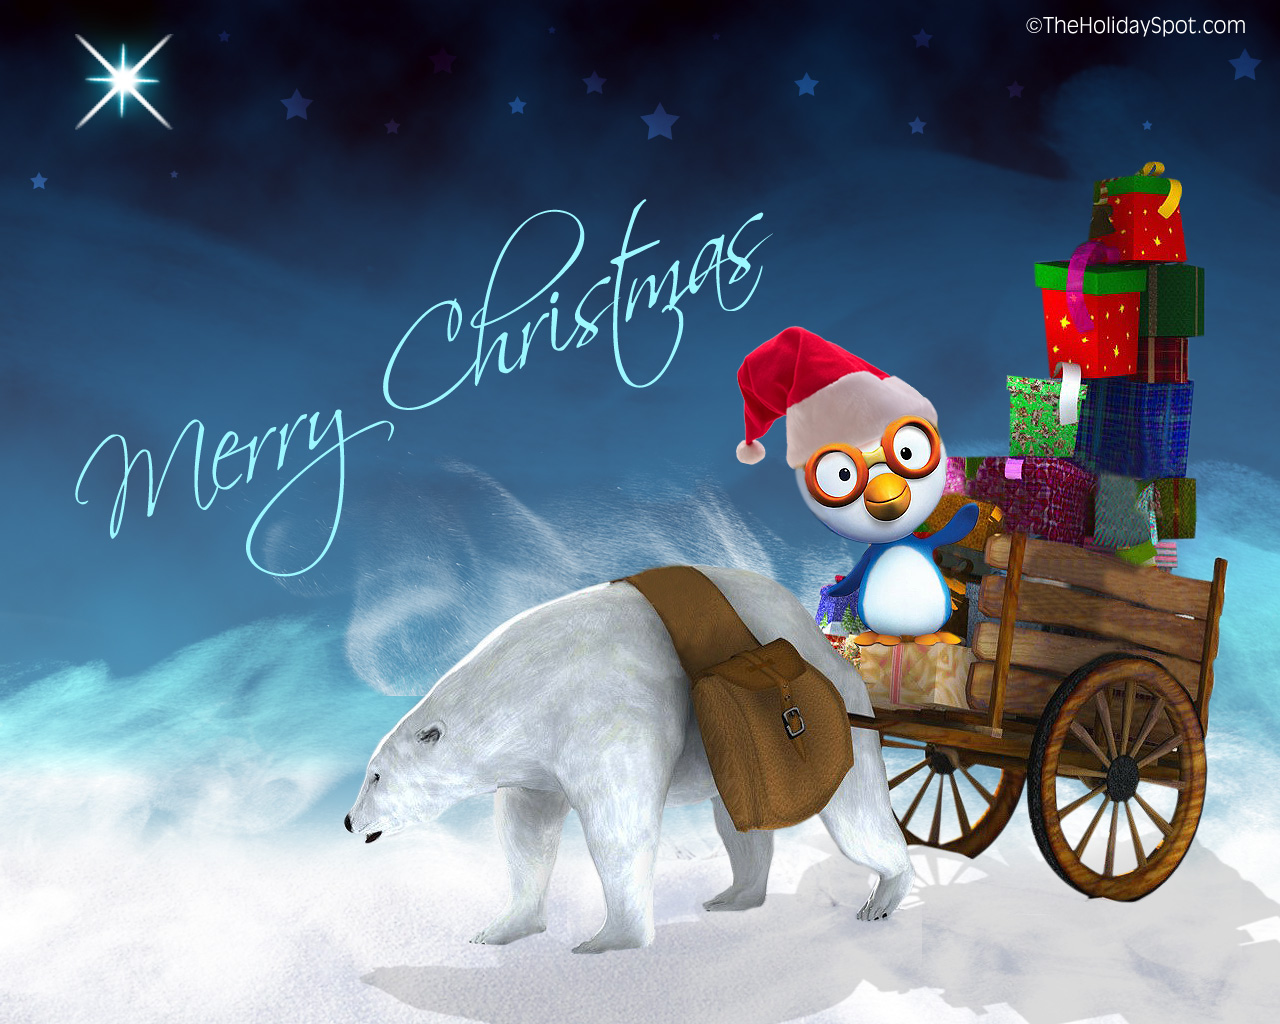 Merry Christmas Wallpaper HD Background